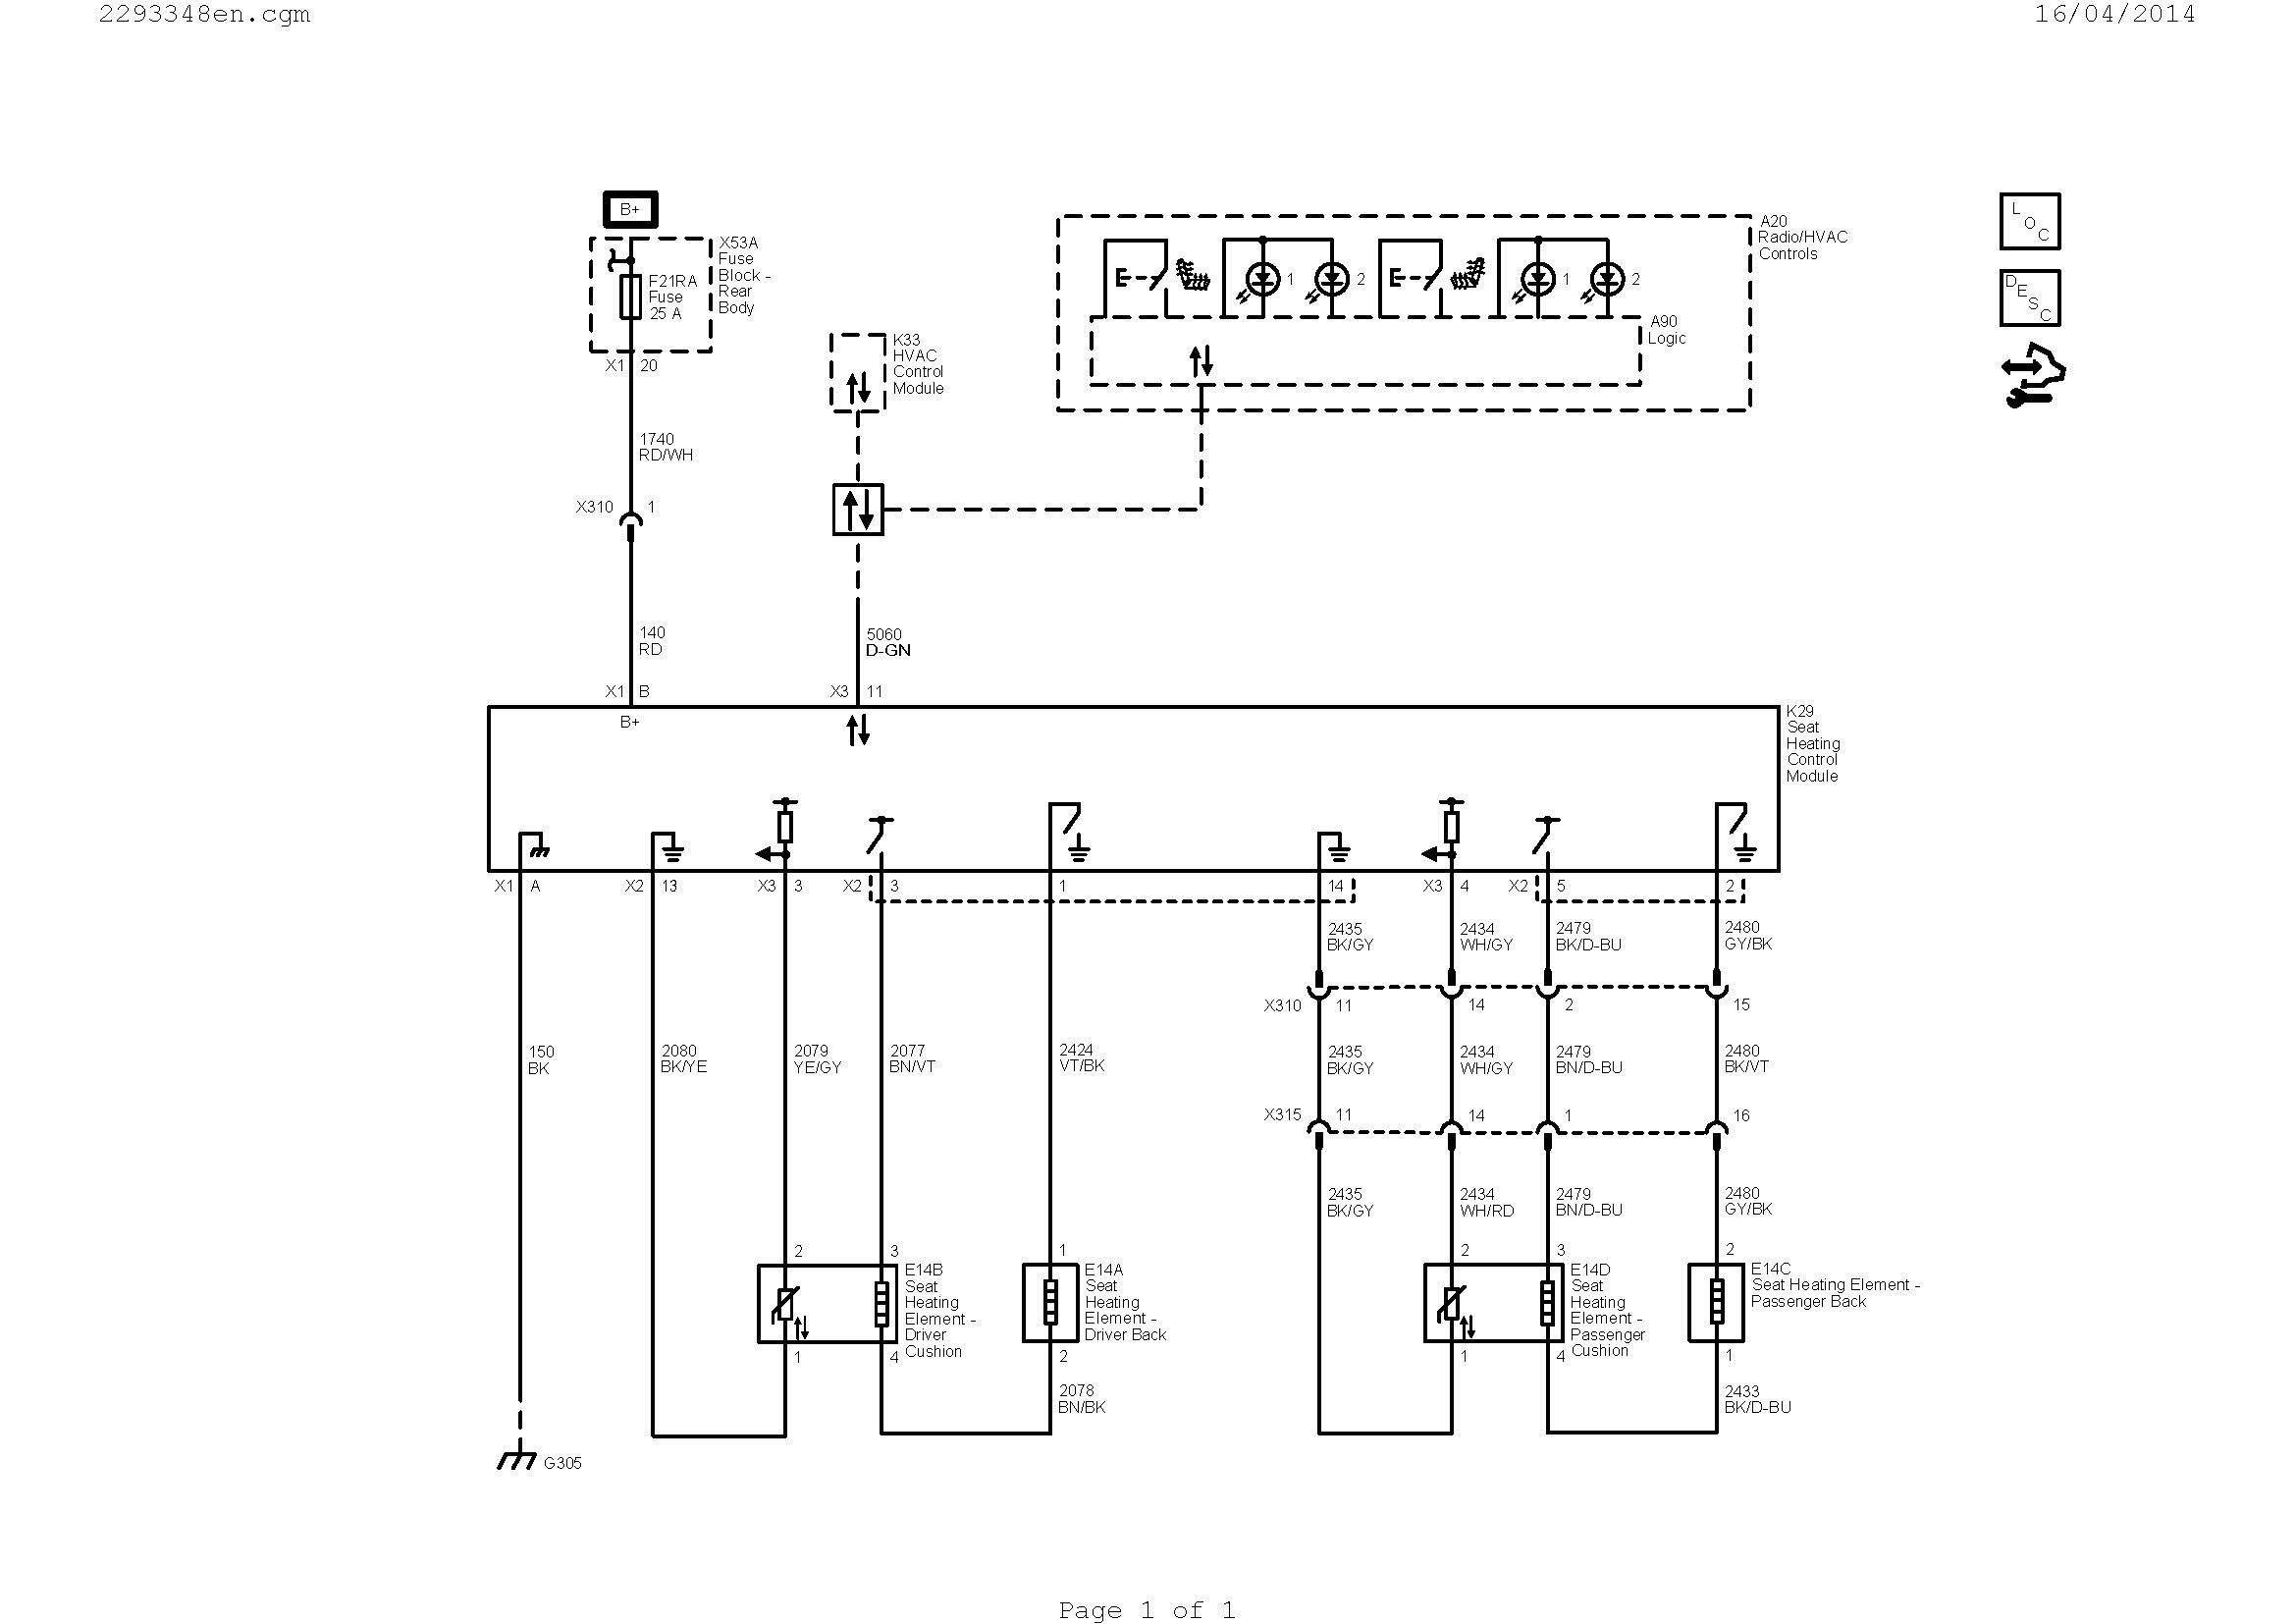 Wiring Diagram for Ac Switch New Wiring Diagram for Changeover Relay Inspirationa Wiring Diagram Ac